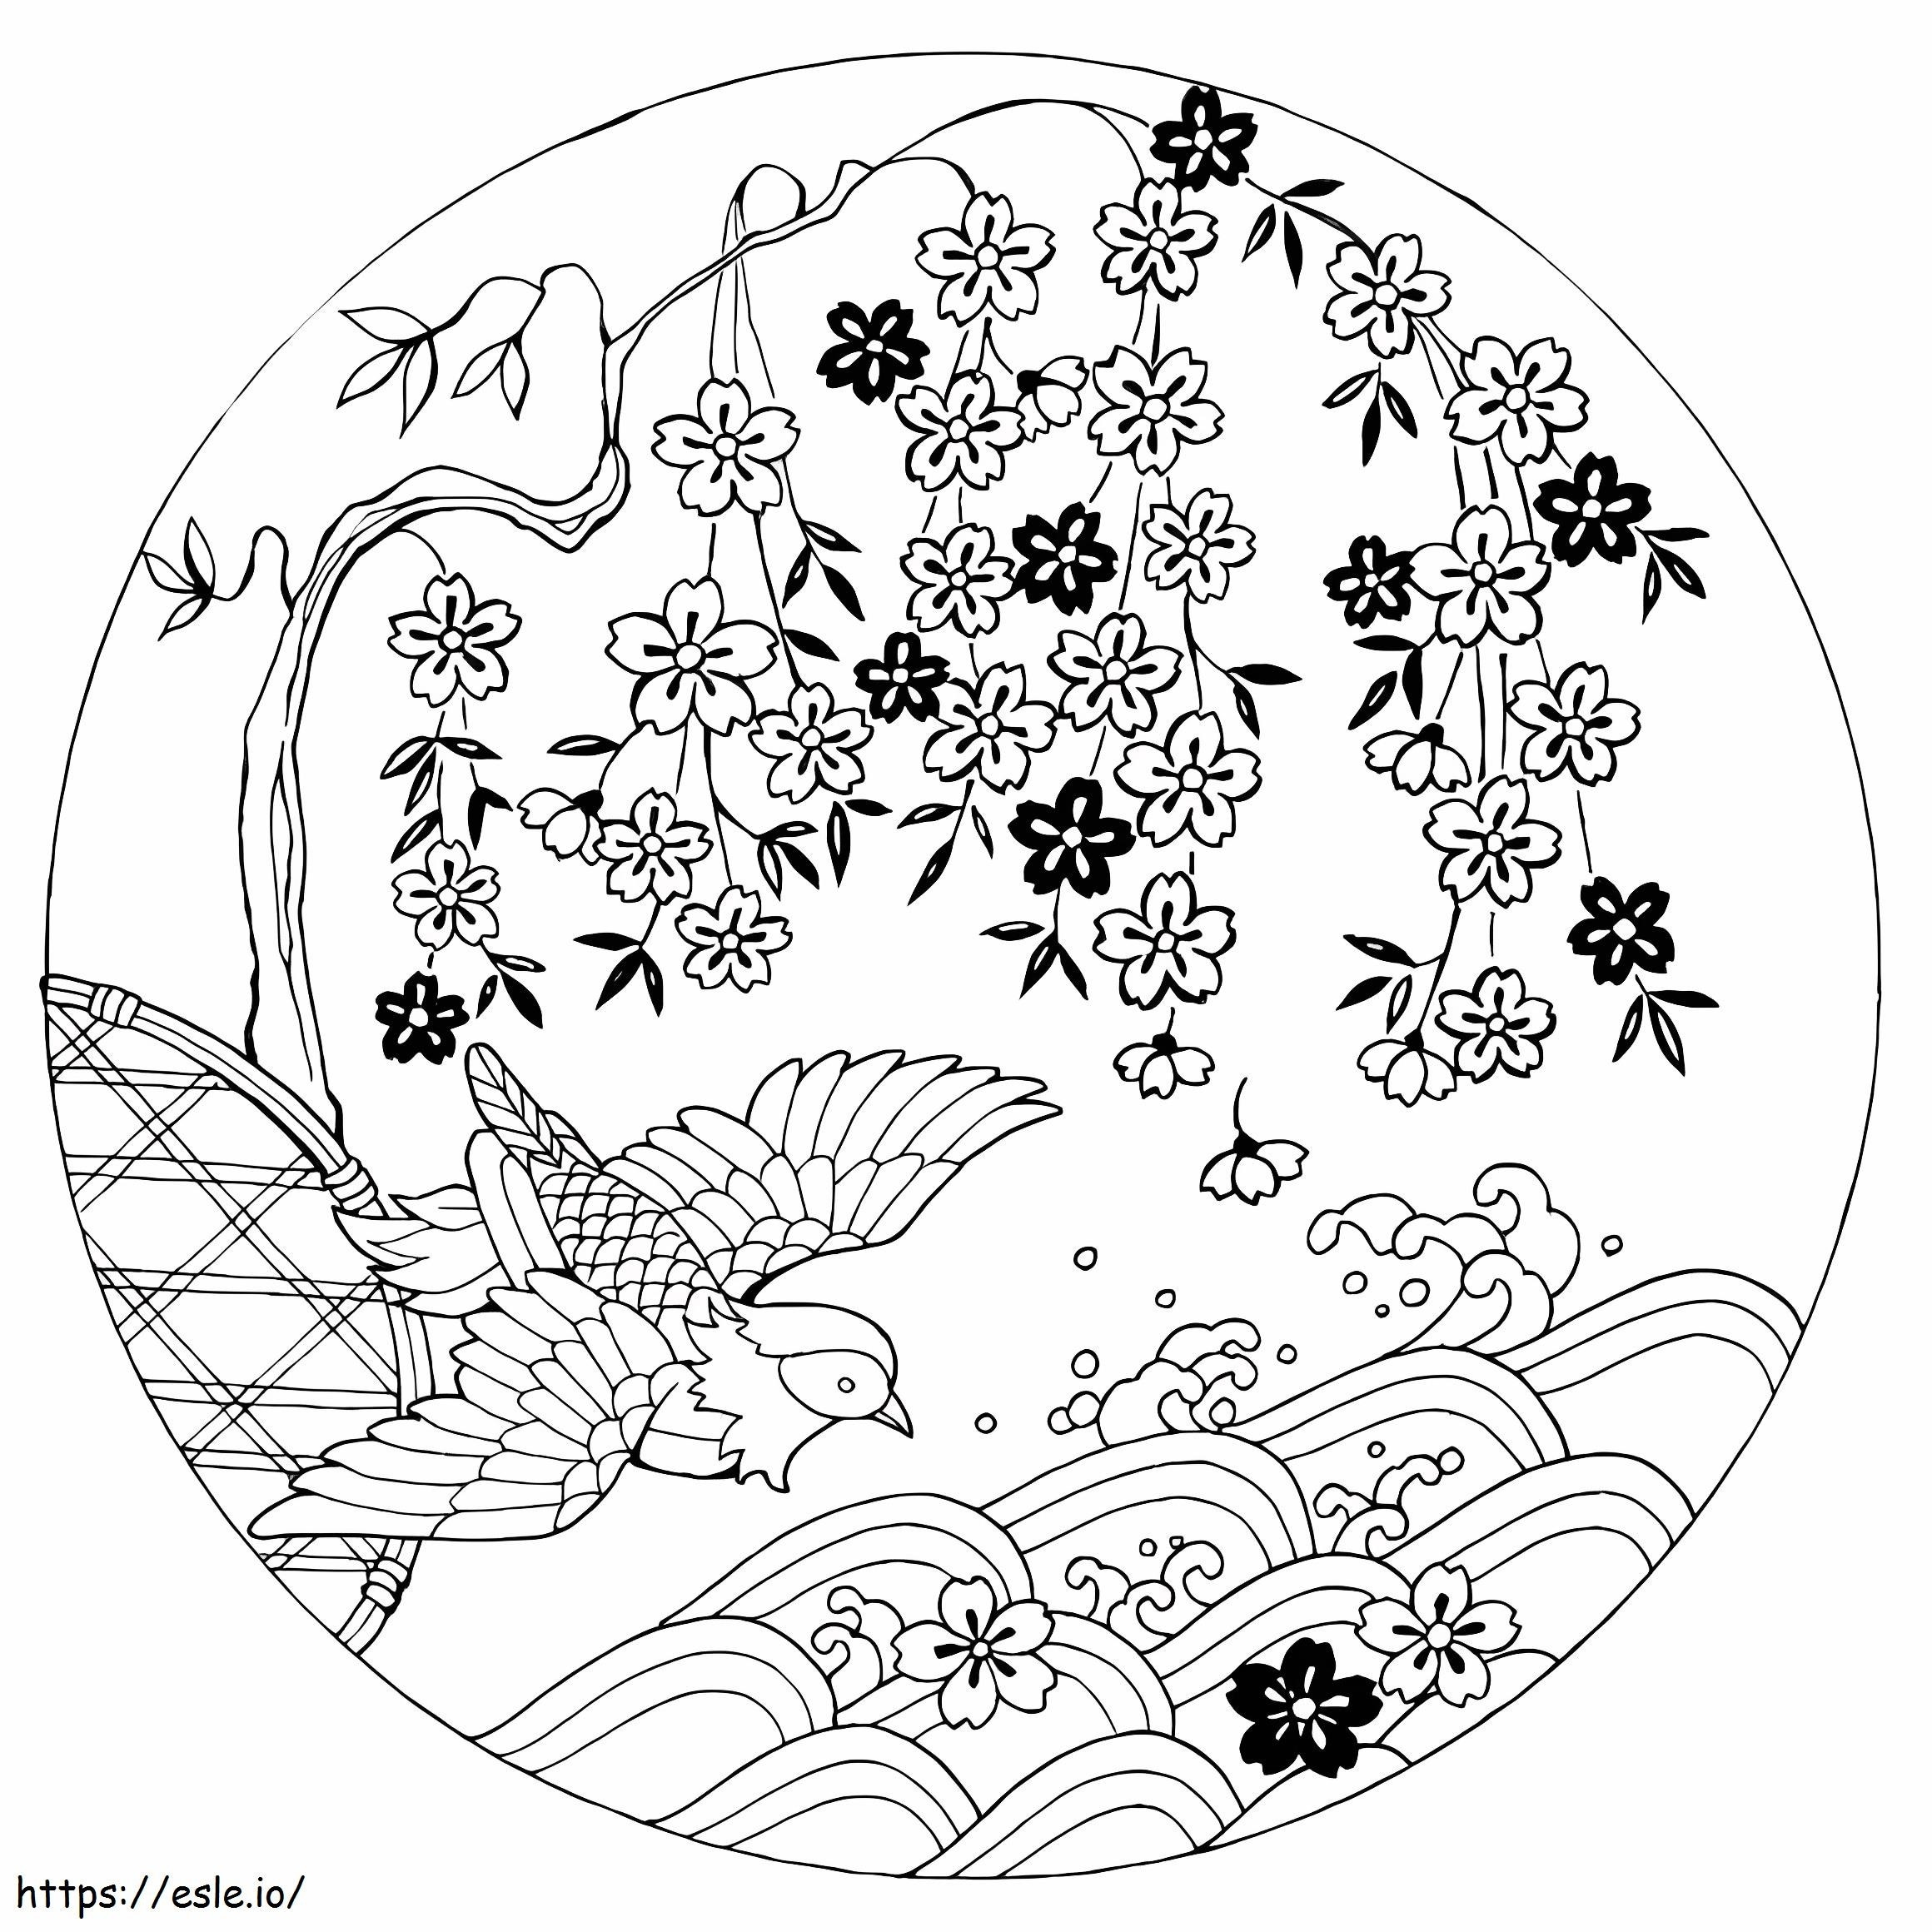 Cherry Blossom In Circle 1 coloring page